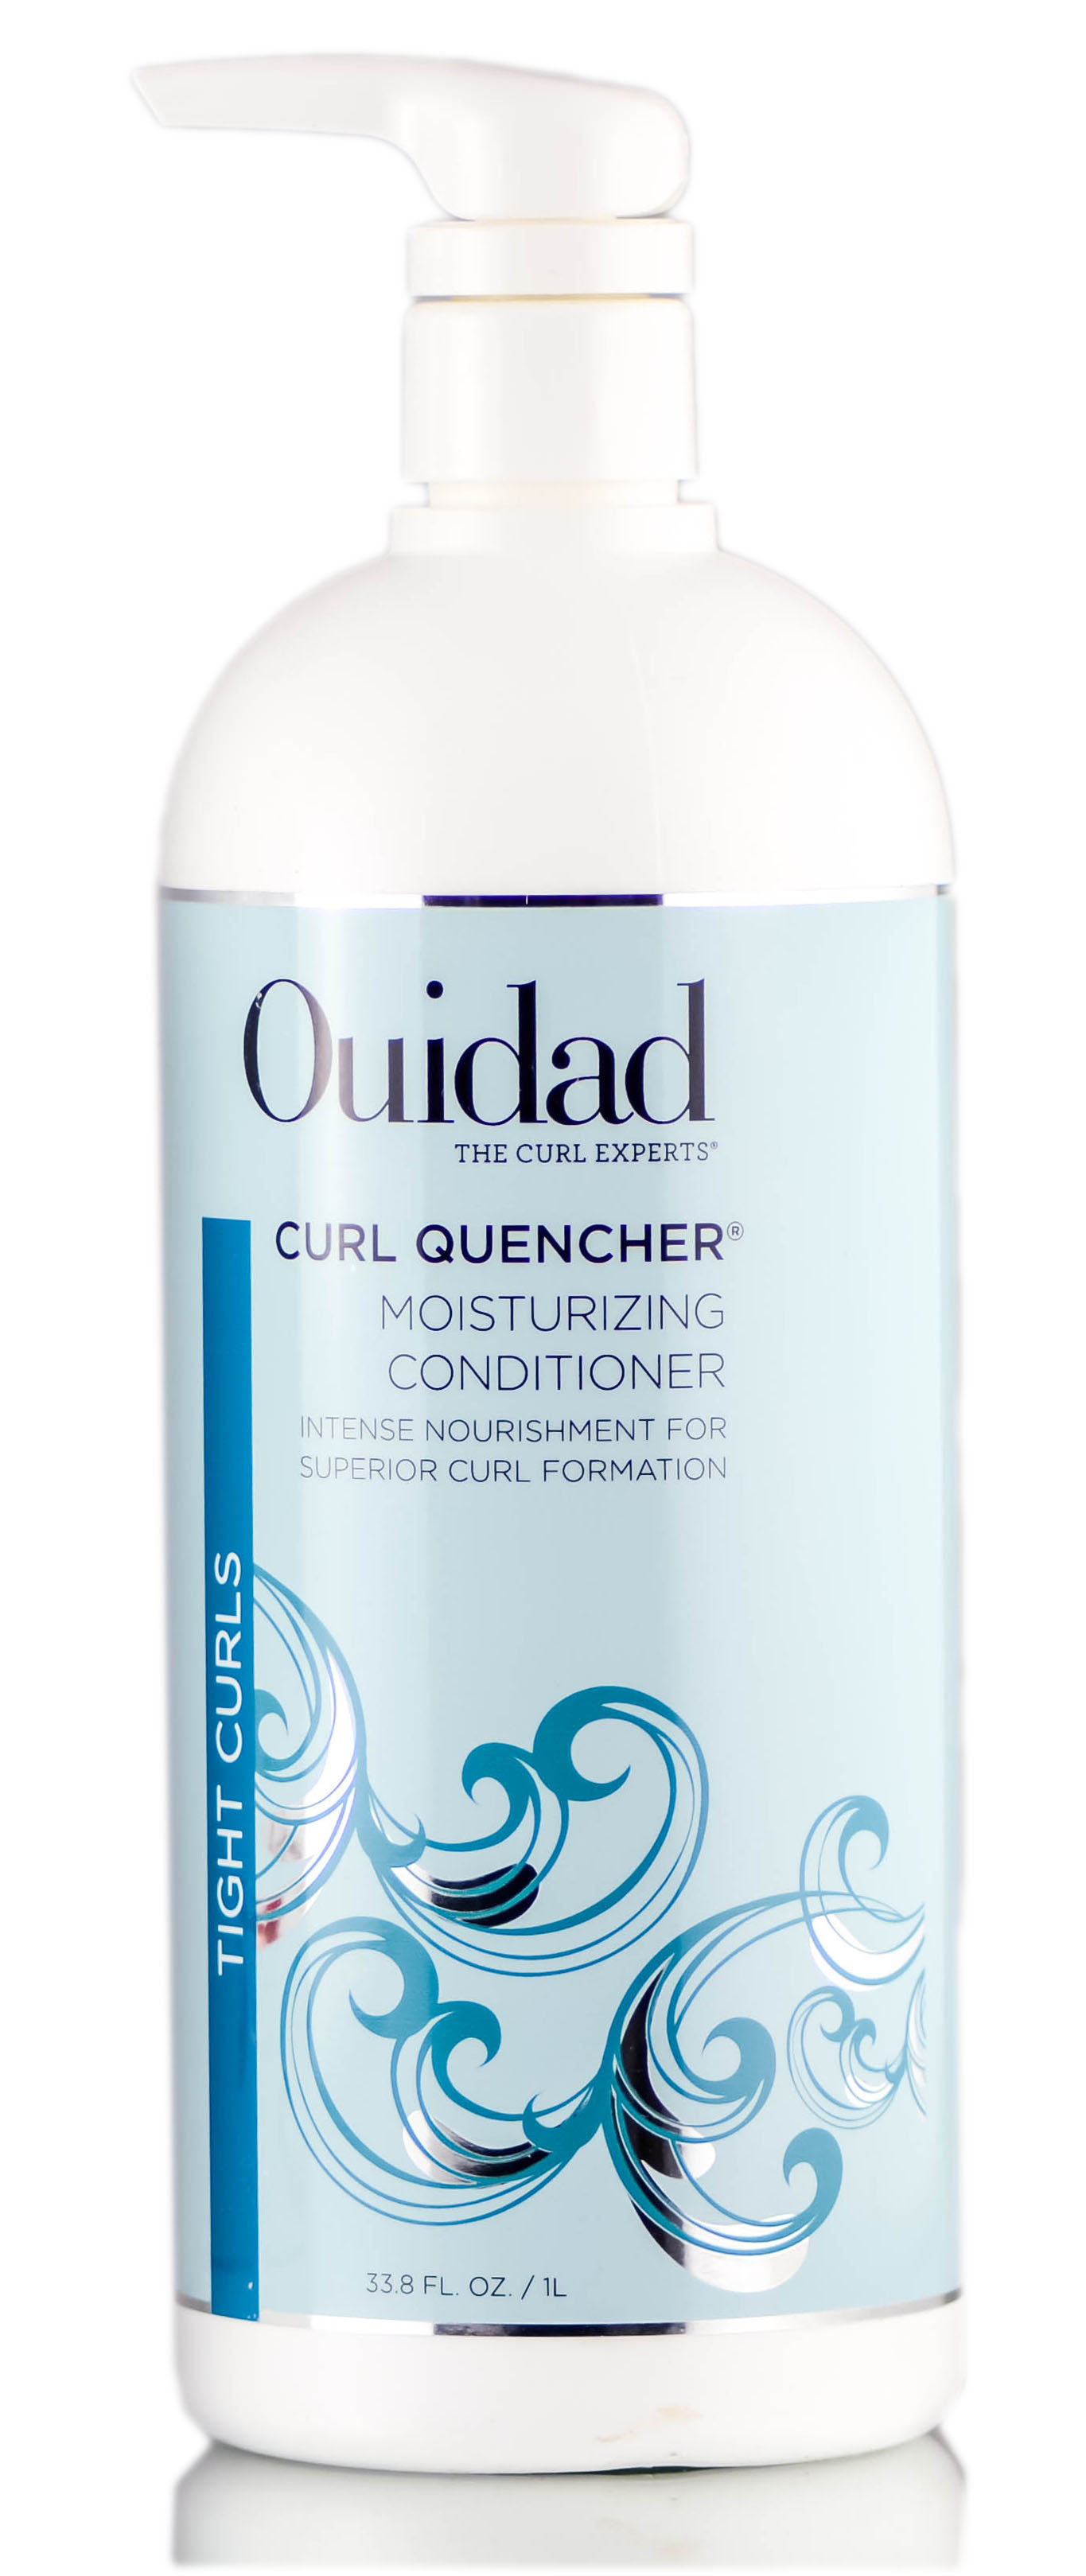 Ouidad Curl Quencher Moisturizing Conditioner (33.8 oz) - image 1 of 2